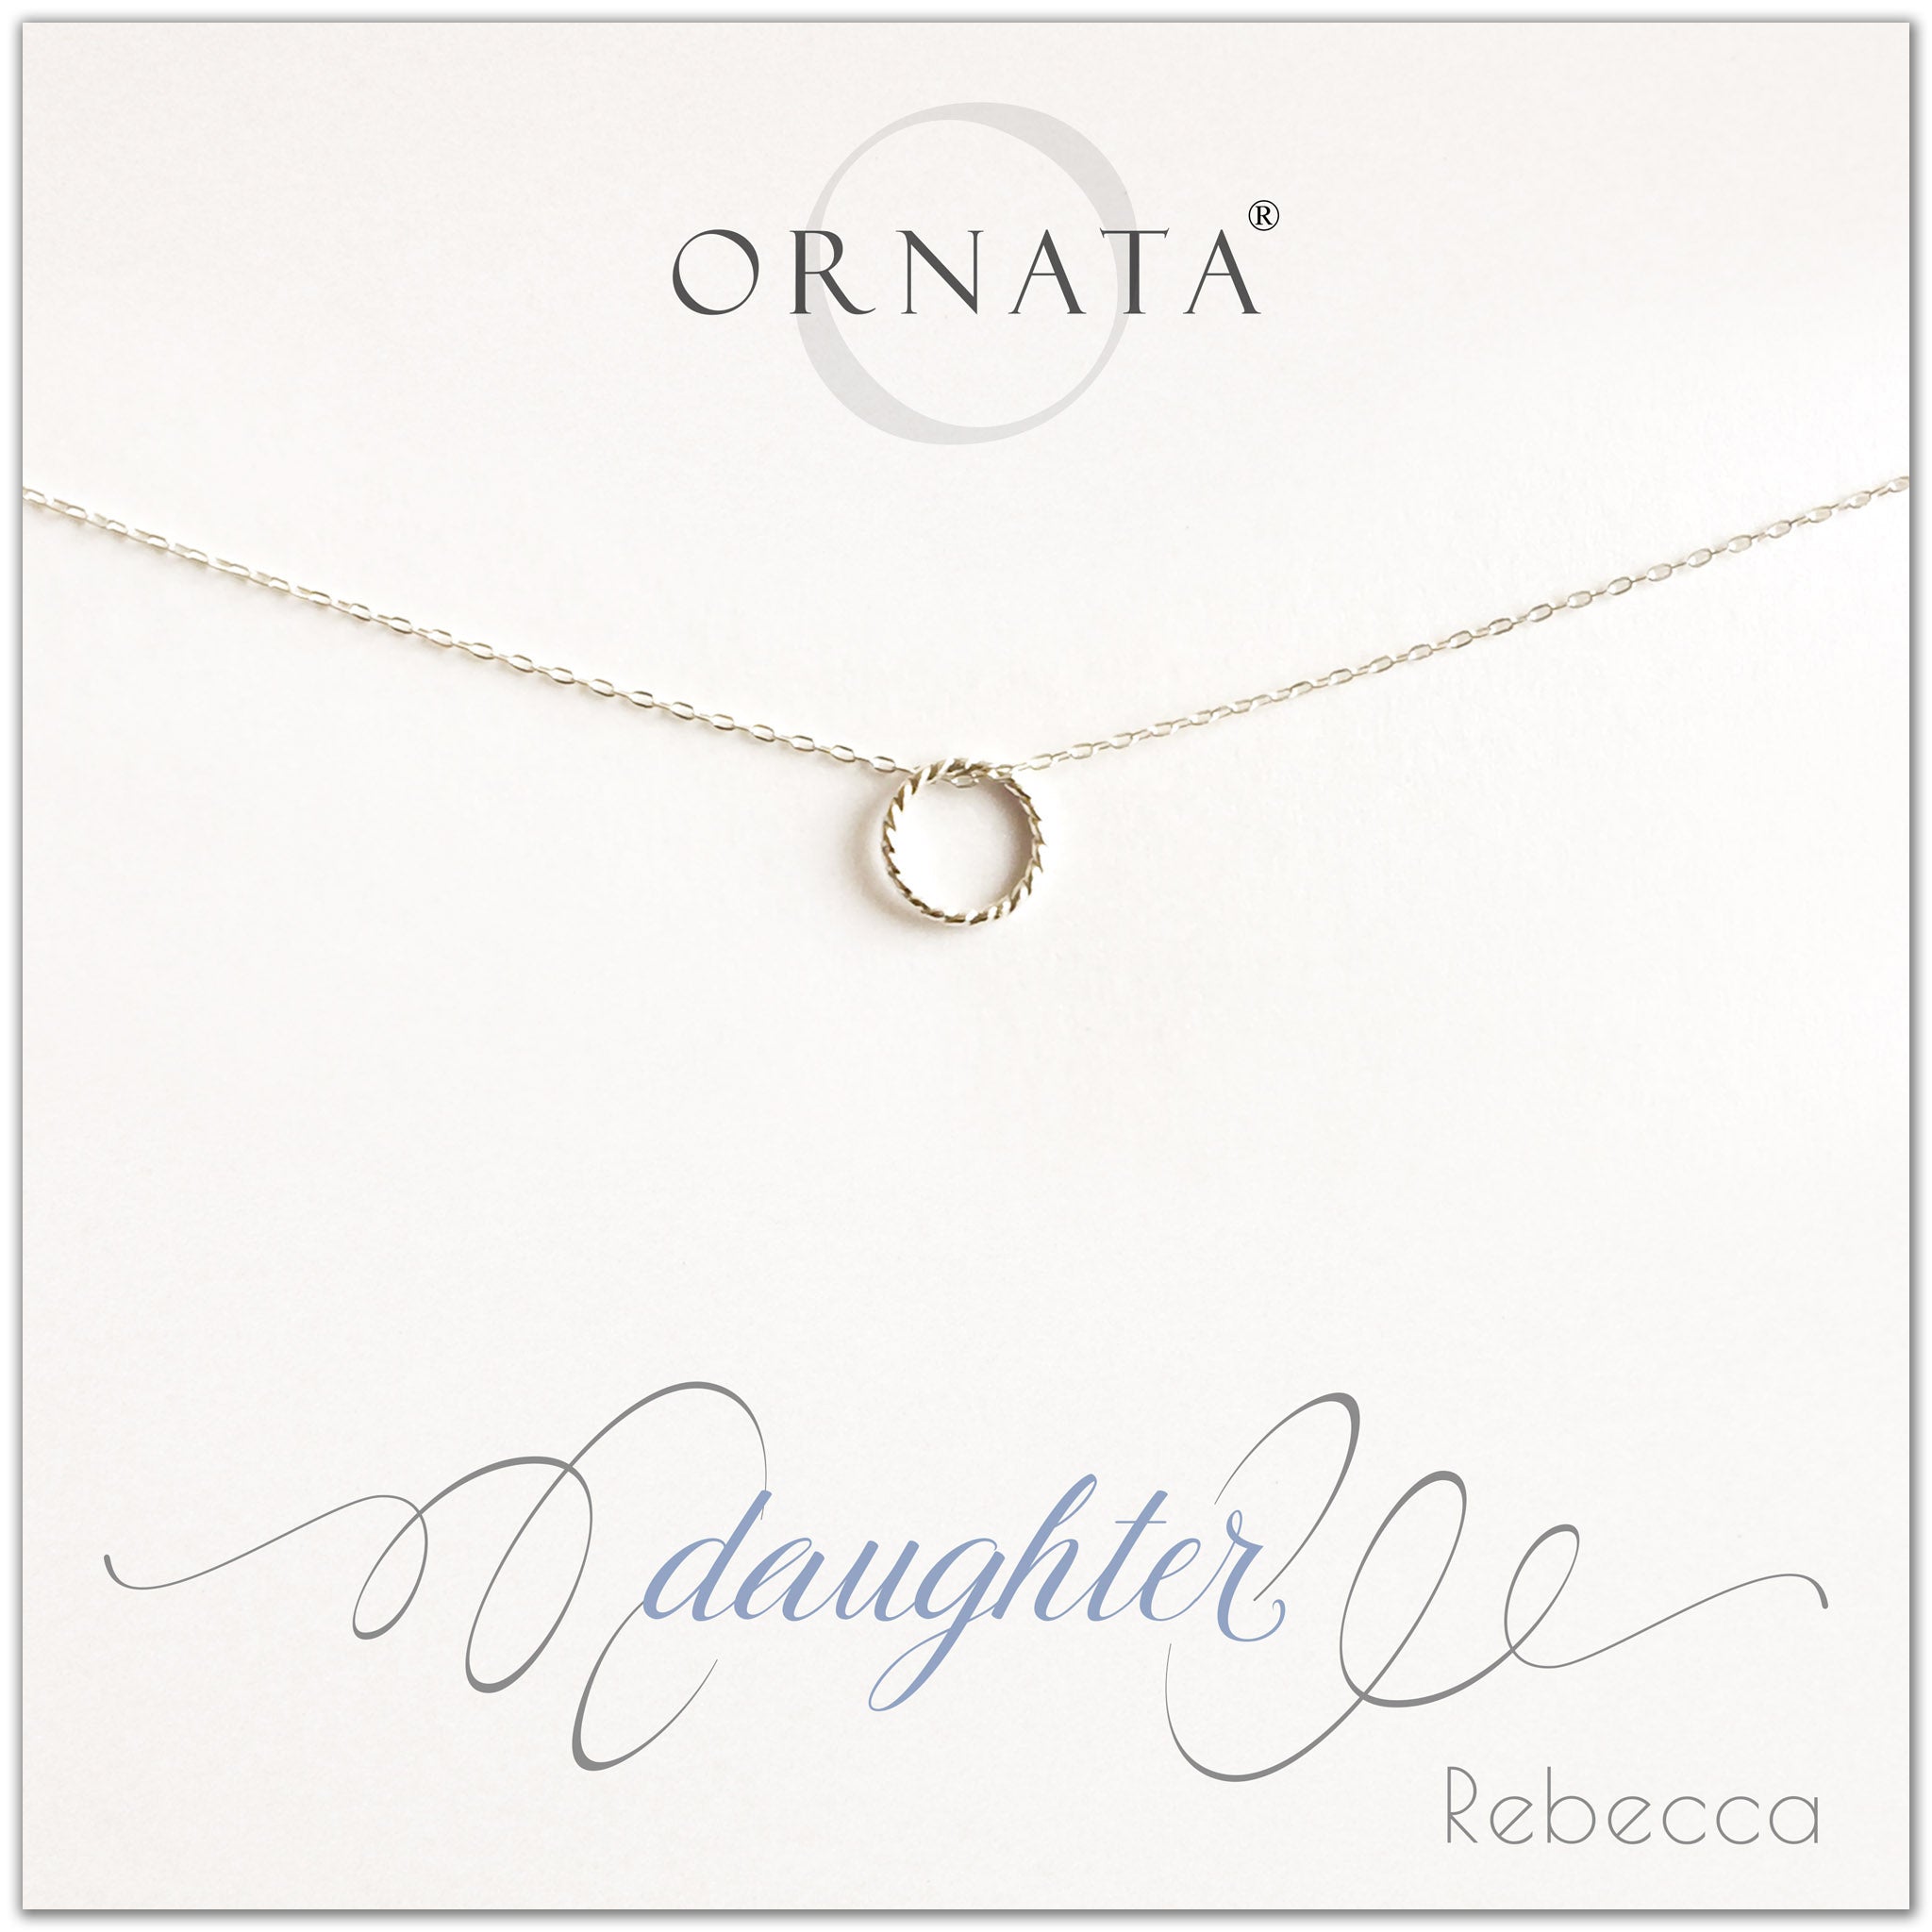 Daughter necklace - personalized silver necklaces. Our sterling silver custom jewelry is a perfect gift for daughters from mothers or fathers. Also a good gift for Mother’s Day. Part of our Generations Jewelry collection. 